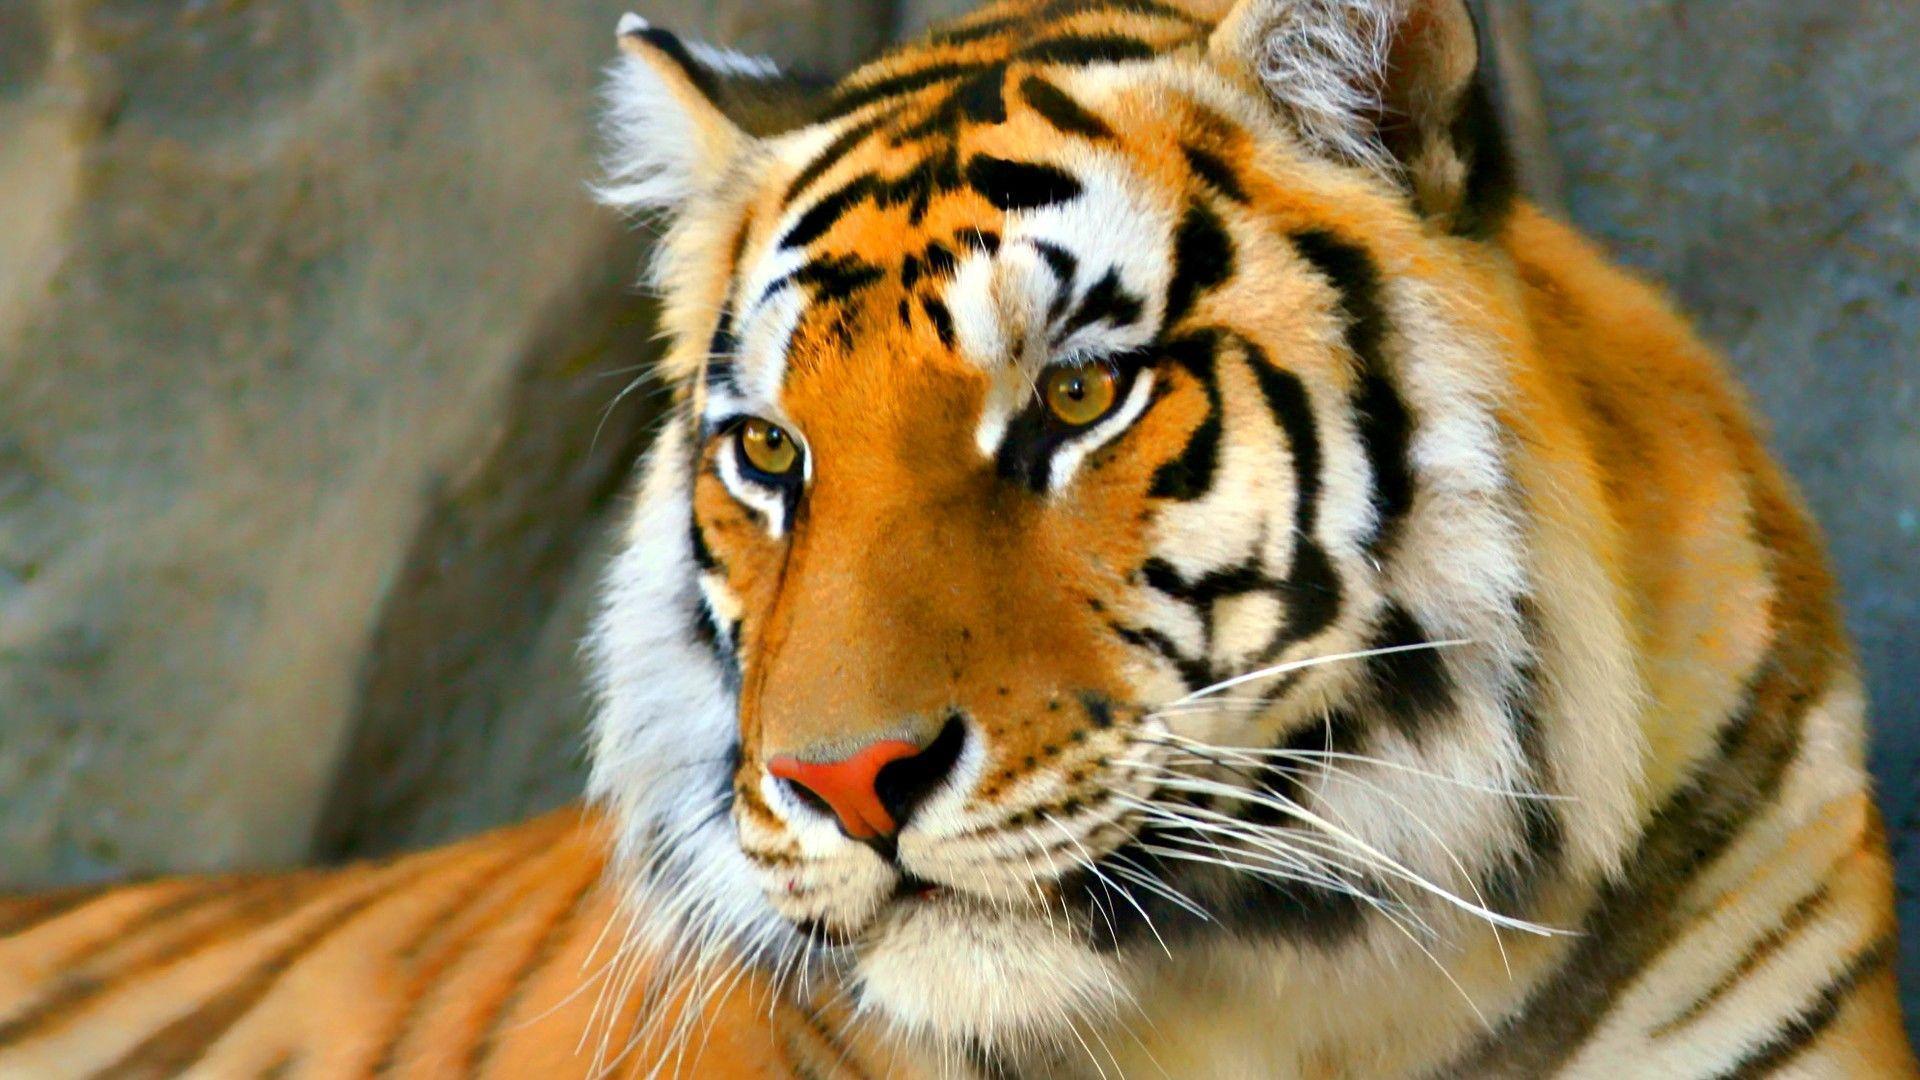 tiger face wallpaper download - Image And Wallpaper free